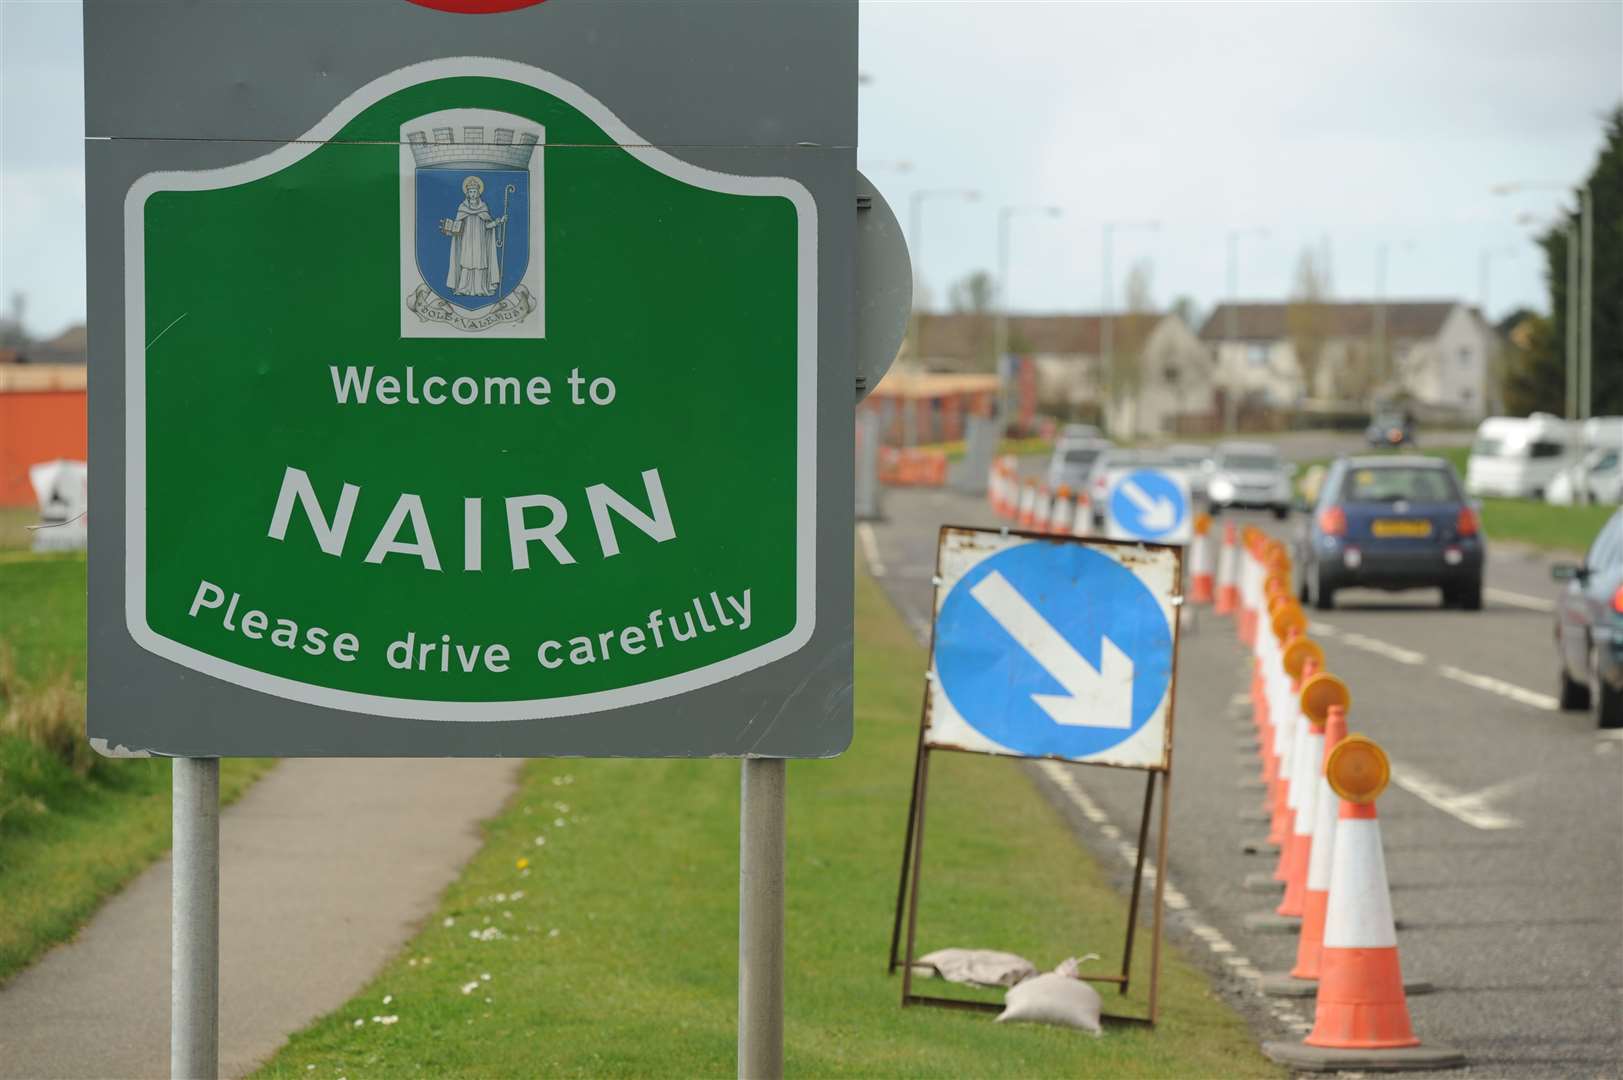 The A96 is the main trunk road east of Inverness, passing through Nairn.